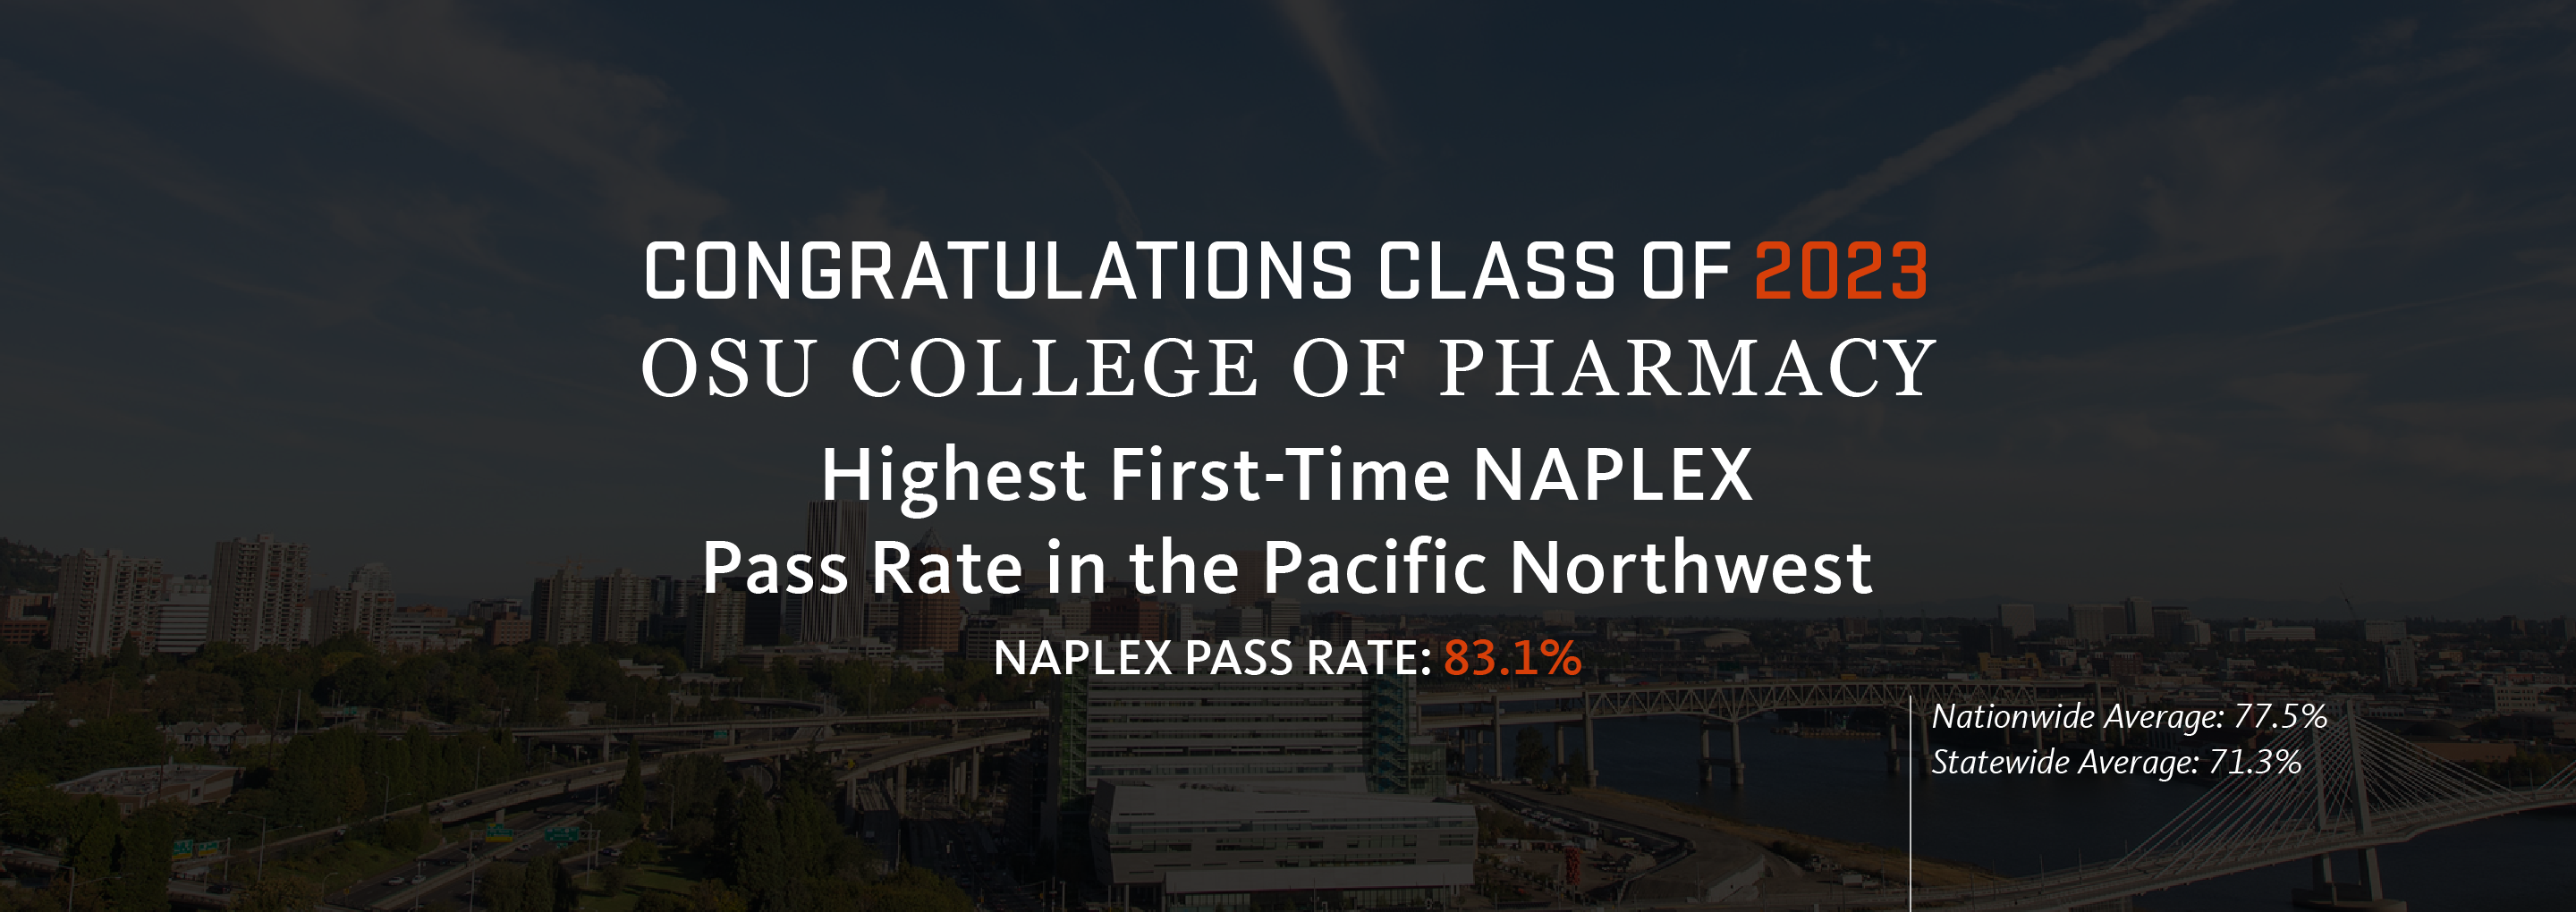 Highest First-Time NAPLEX Pass Rate in the Pacific Northwest. 83.1% compared to the national average of 77.5%